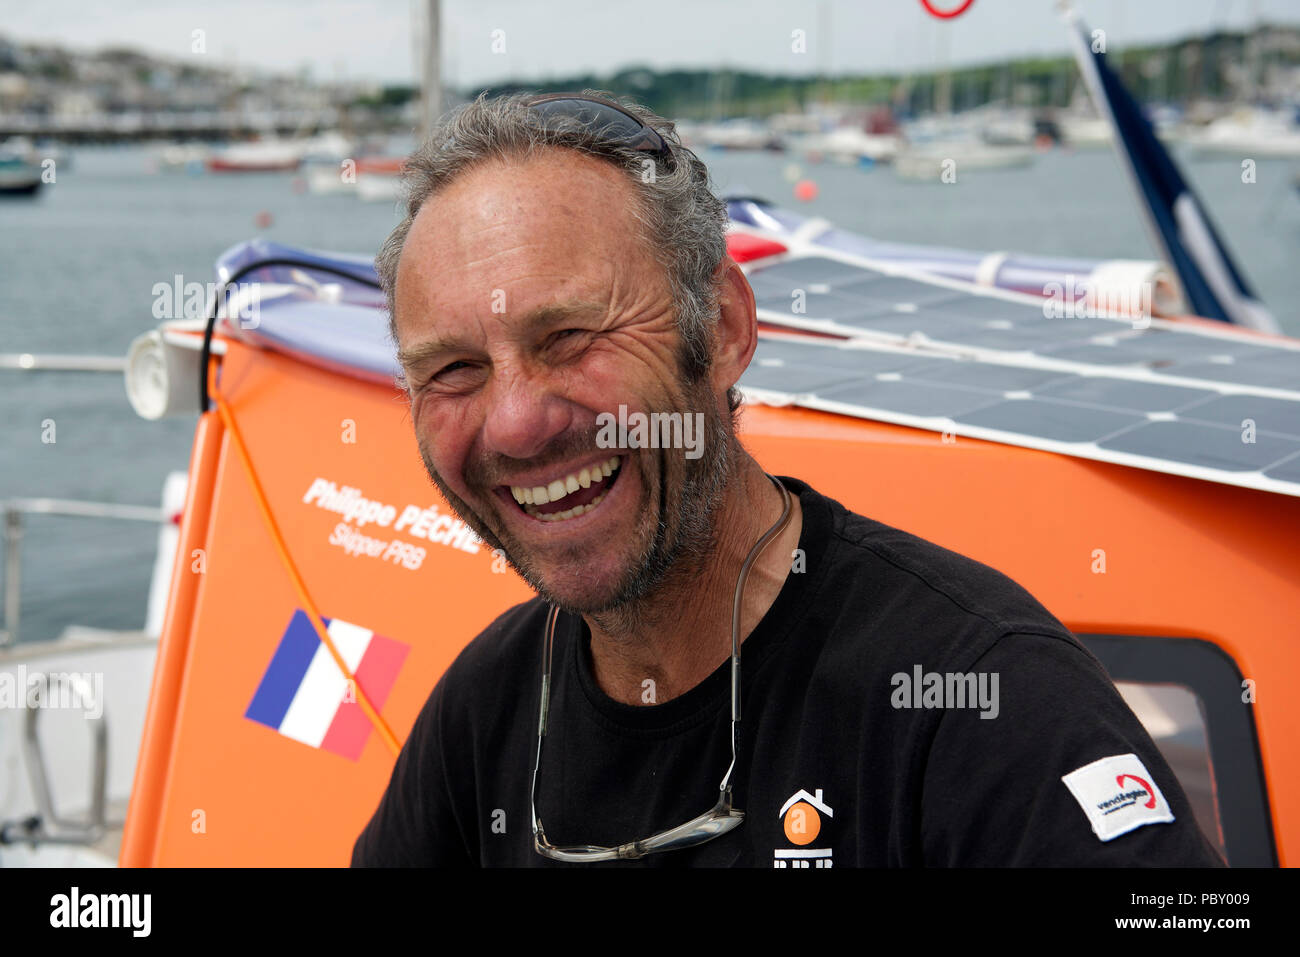 Philippe Péché, skipper of the yacht PRB in the 2018 Golden Globe singlehanded round-the-world race. Photo taken in Falmouth, UK, in June 2018. Stock Photo